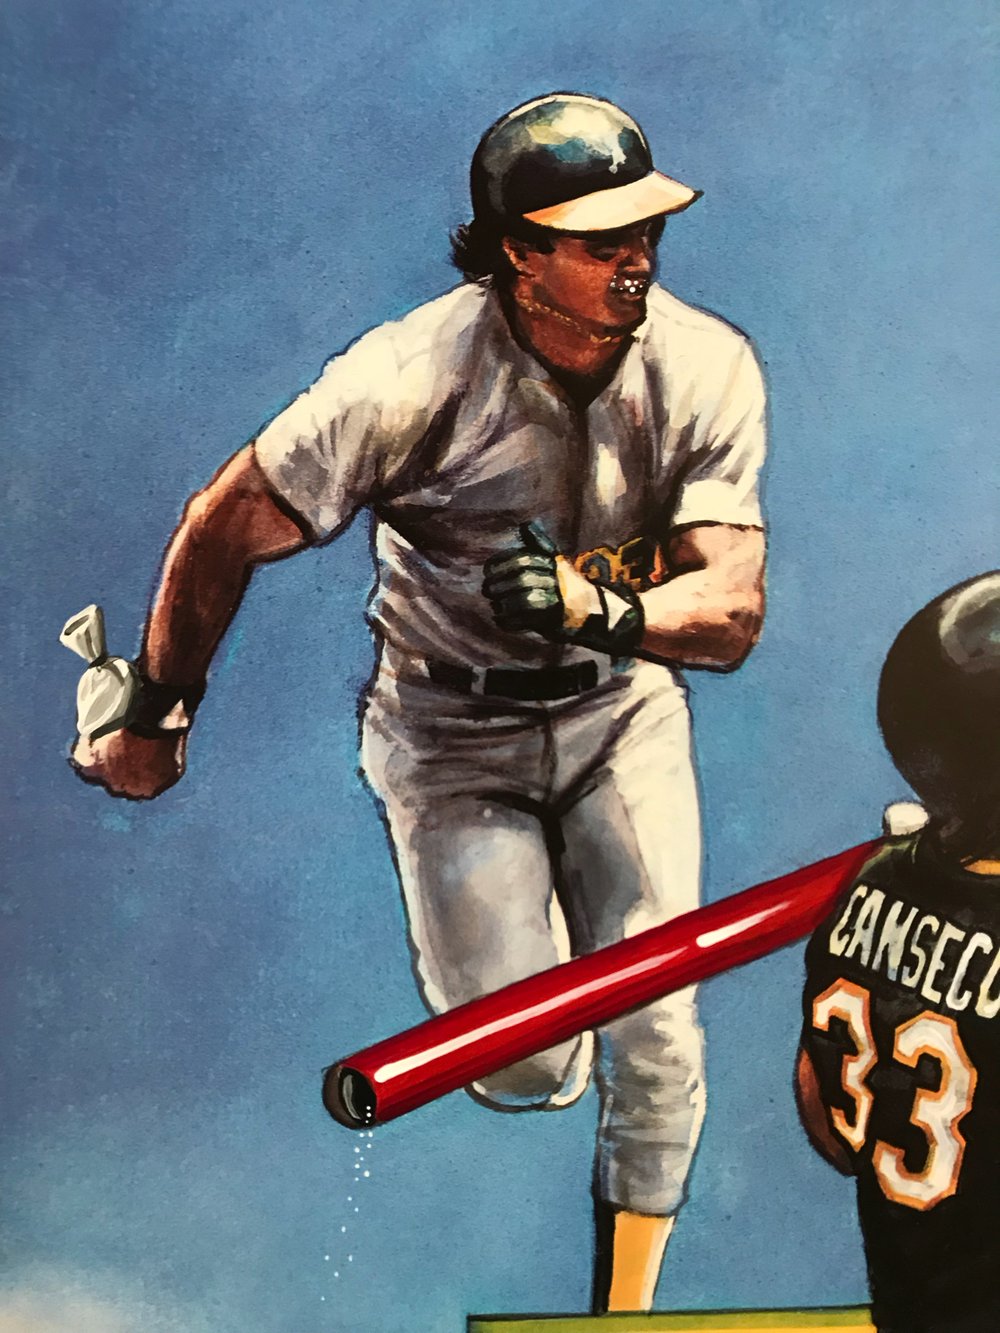 Jose Cansecocaine Shadow Box